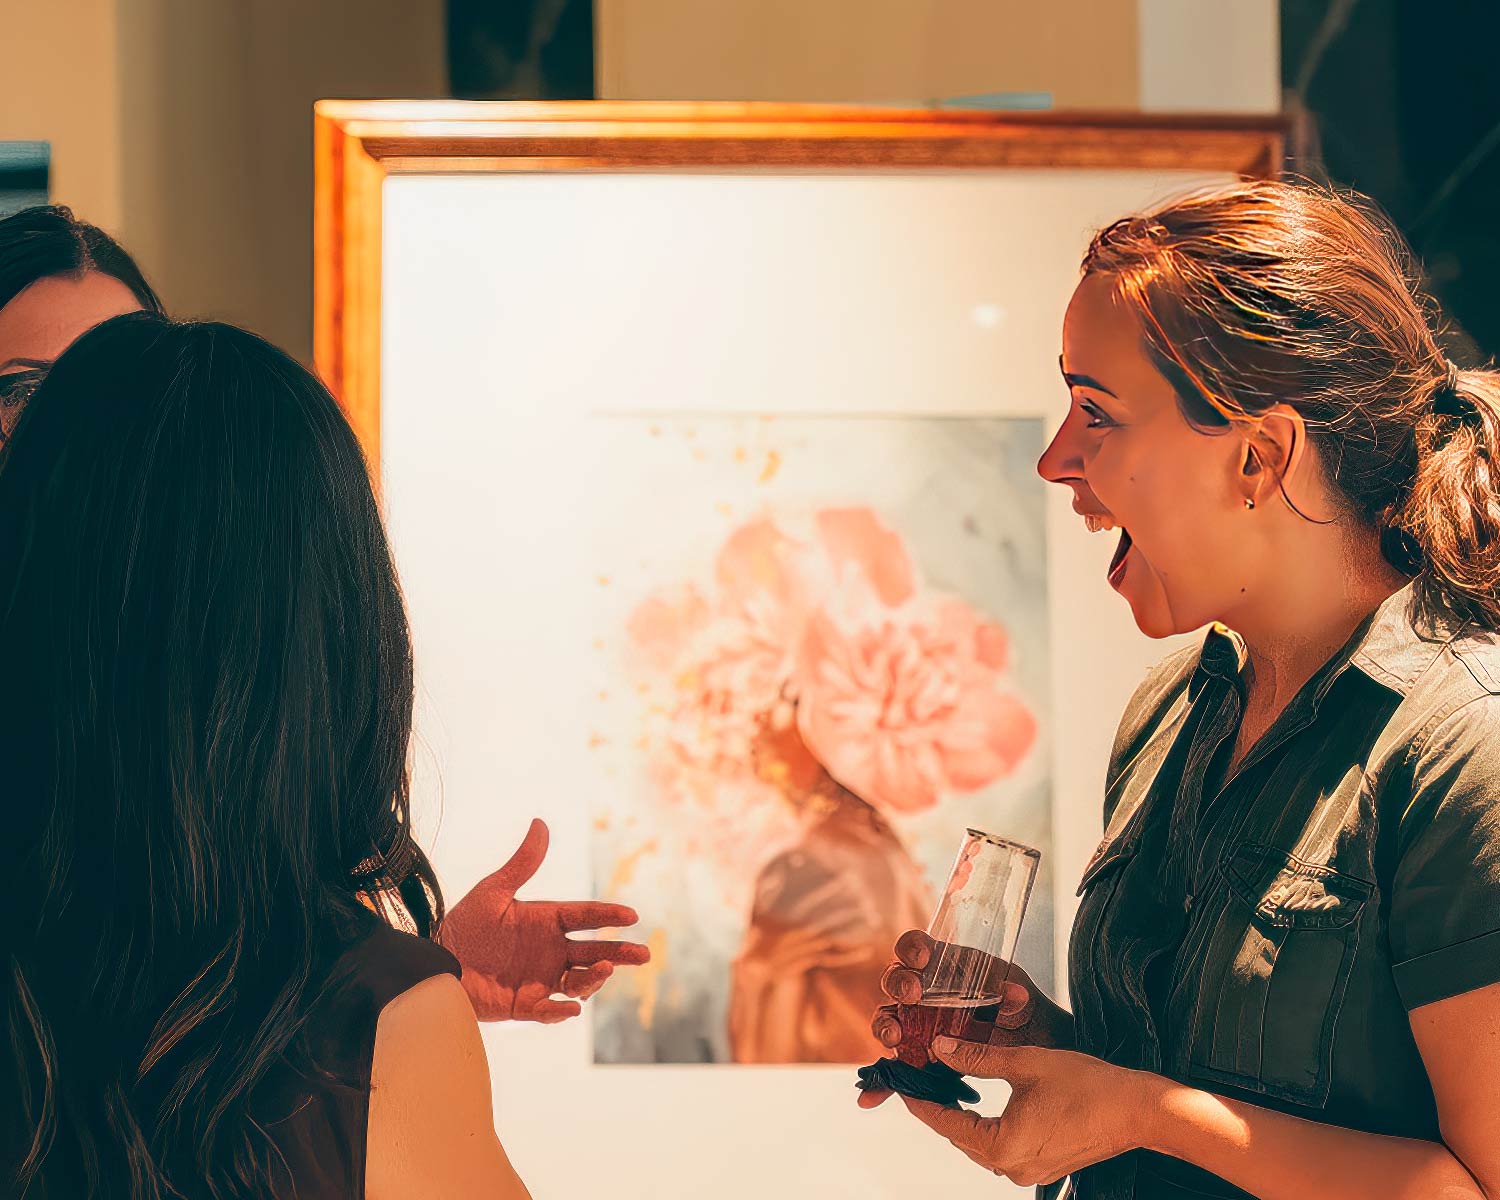 crowded gallery with people admiring watercolor paintings hanging on the walls. The artist, Alex Righetto, is standing in the foreground, smiling at the visitors.